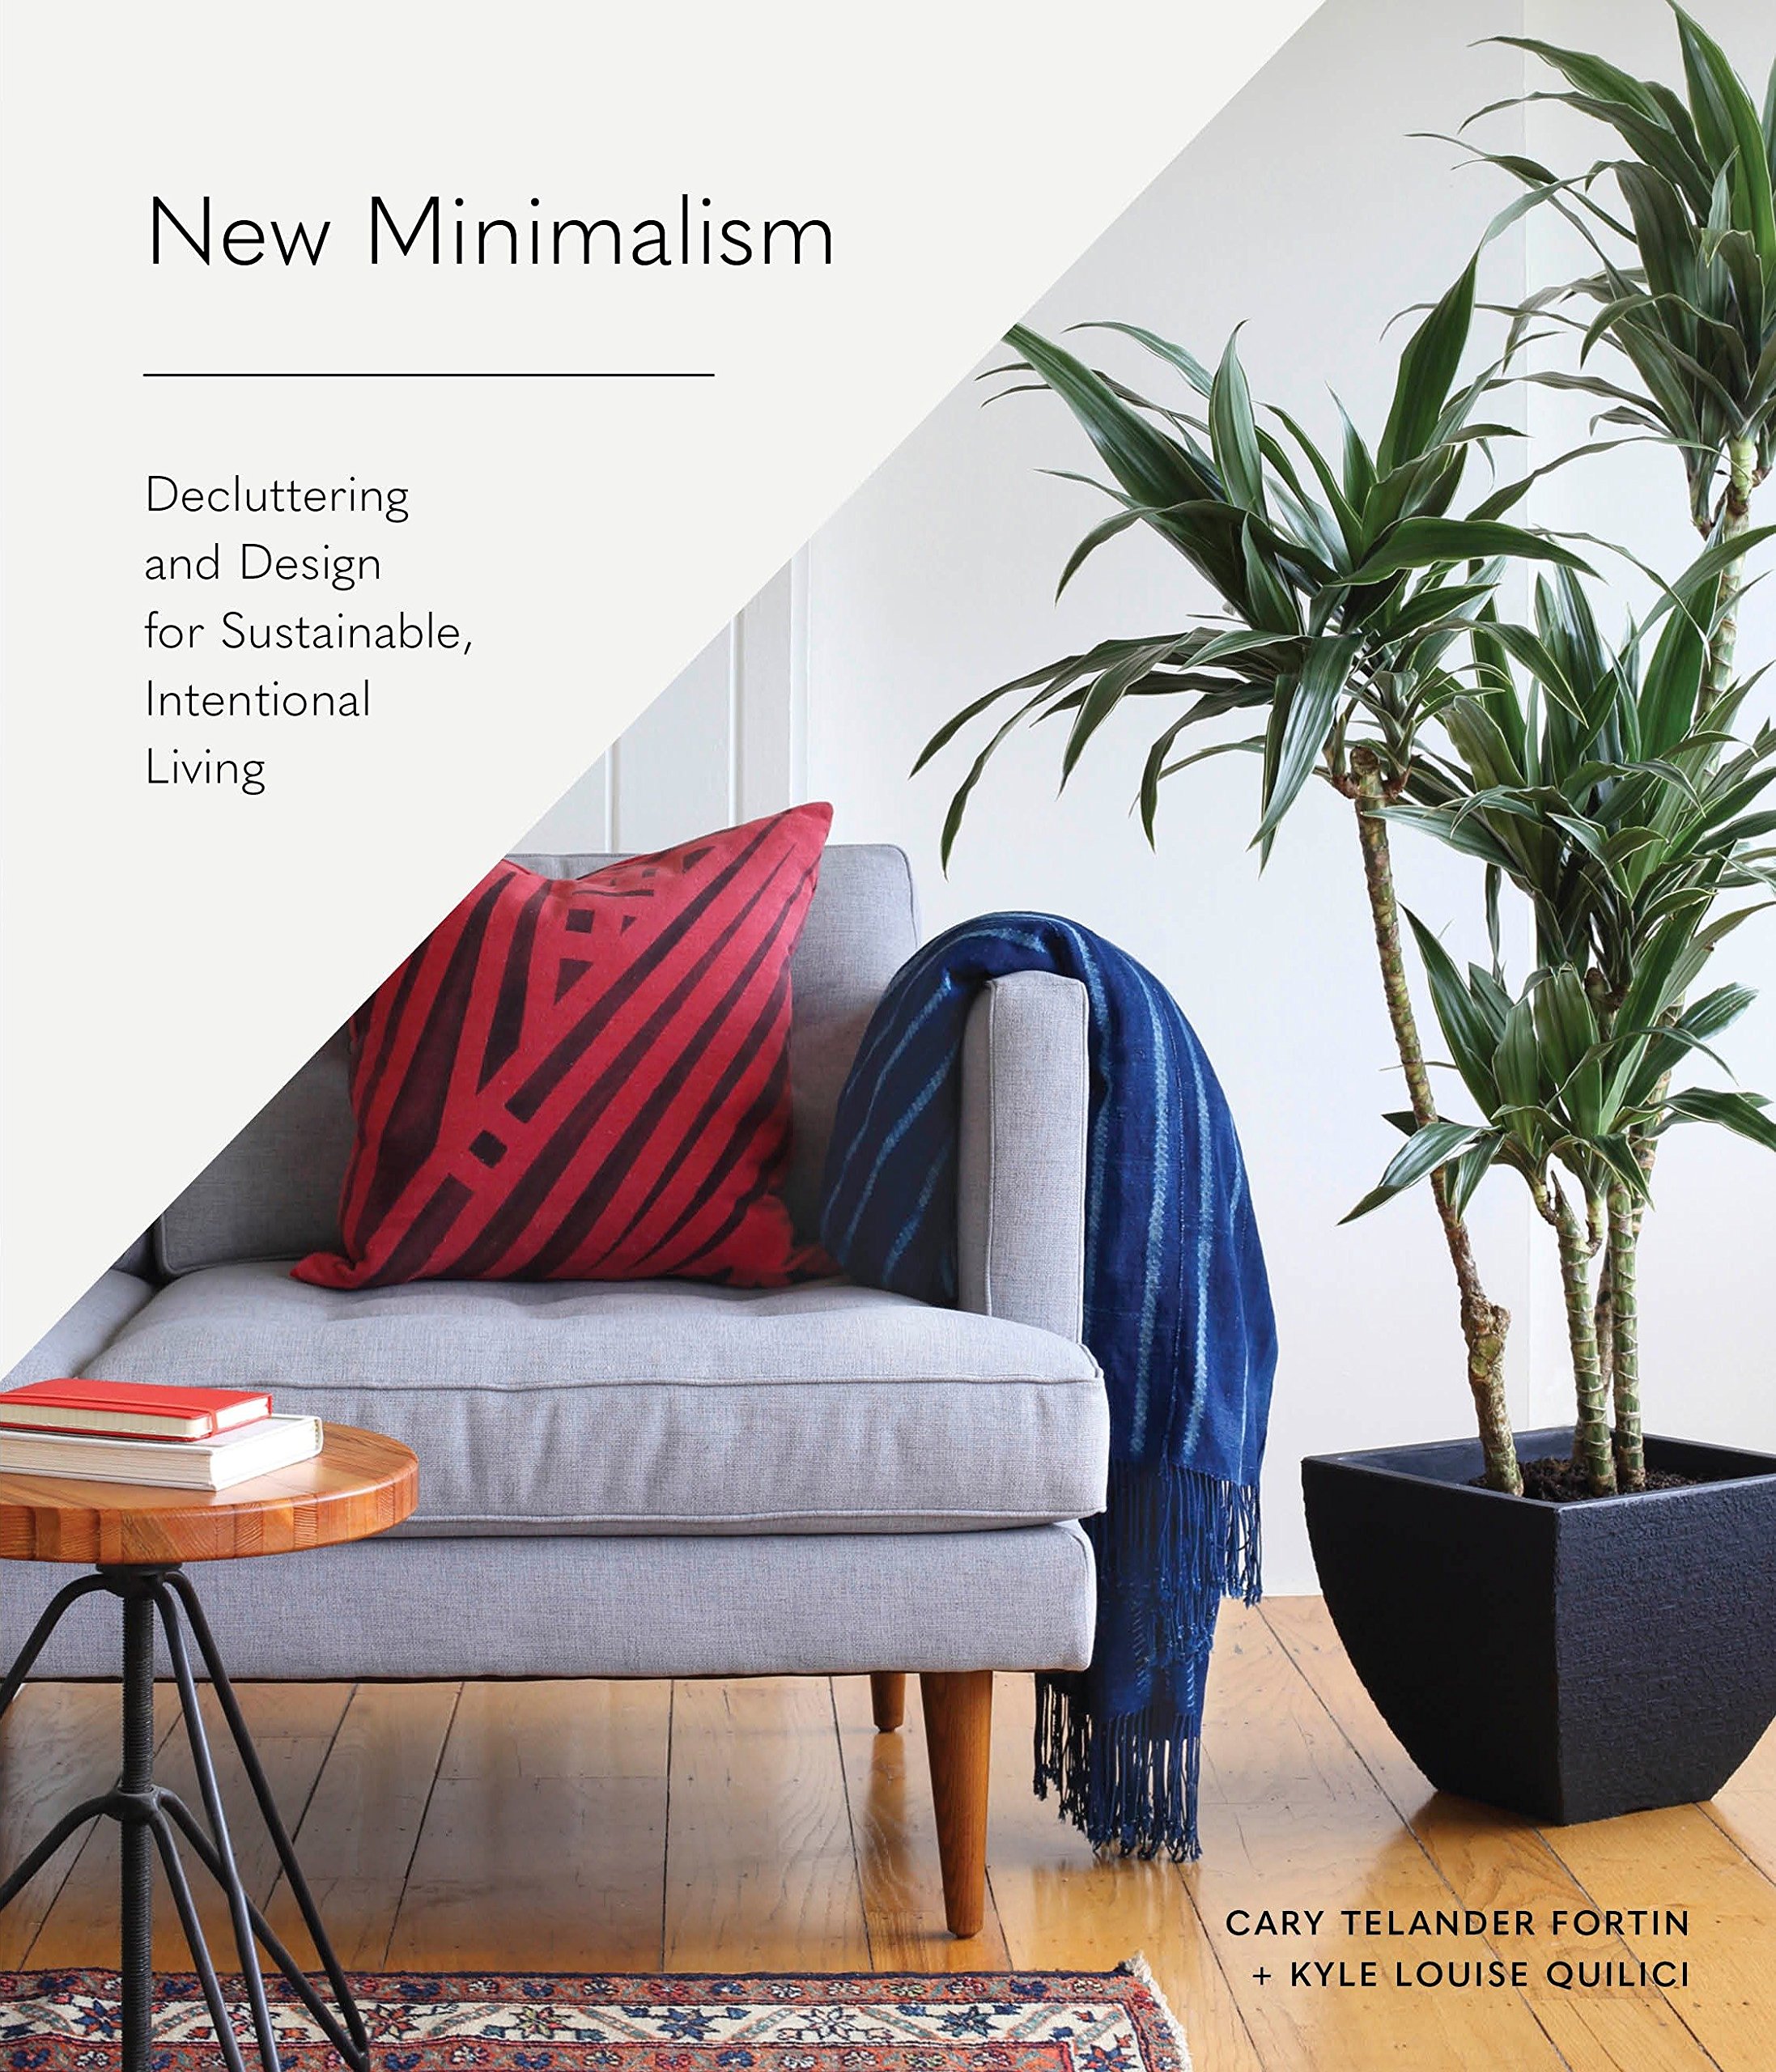 New Minimalism | Cary Telander Fortin, Kyle Louise Quilici